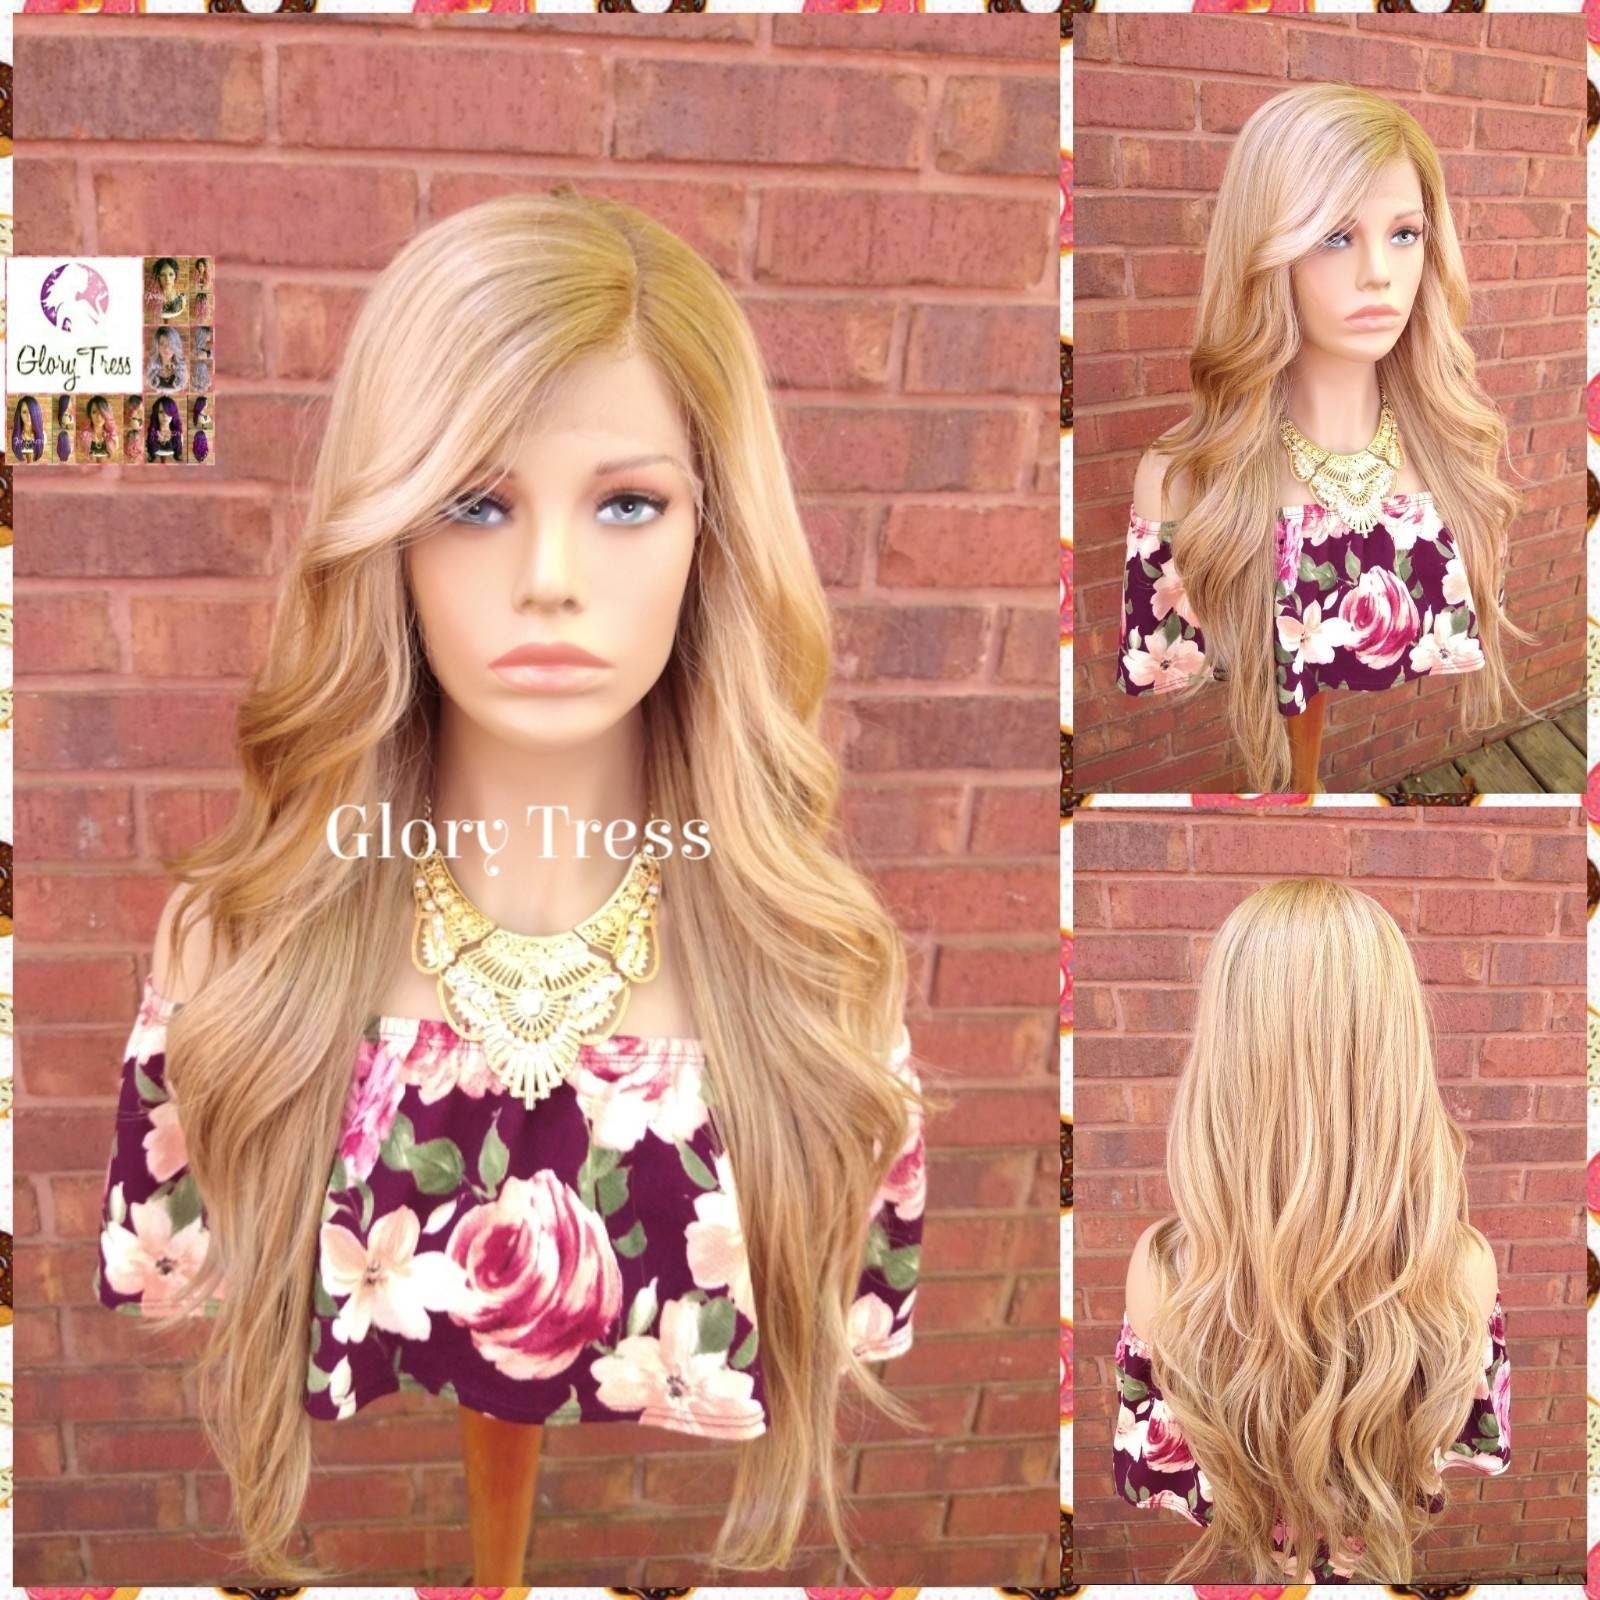 24" Ash Blonde Lace Front Wig Long Wavy Wig Dark Roots Ombre Blonde Wig Alopecia Chemo Wig With Side Lace Part Glory Tress - AMAZING GRACE